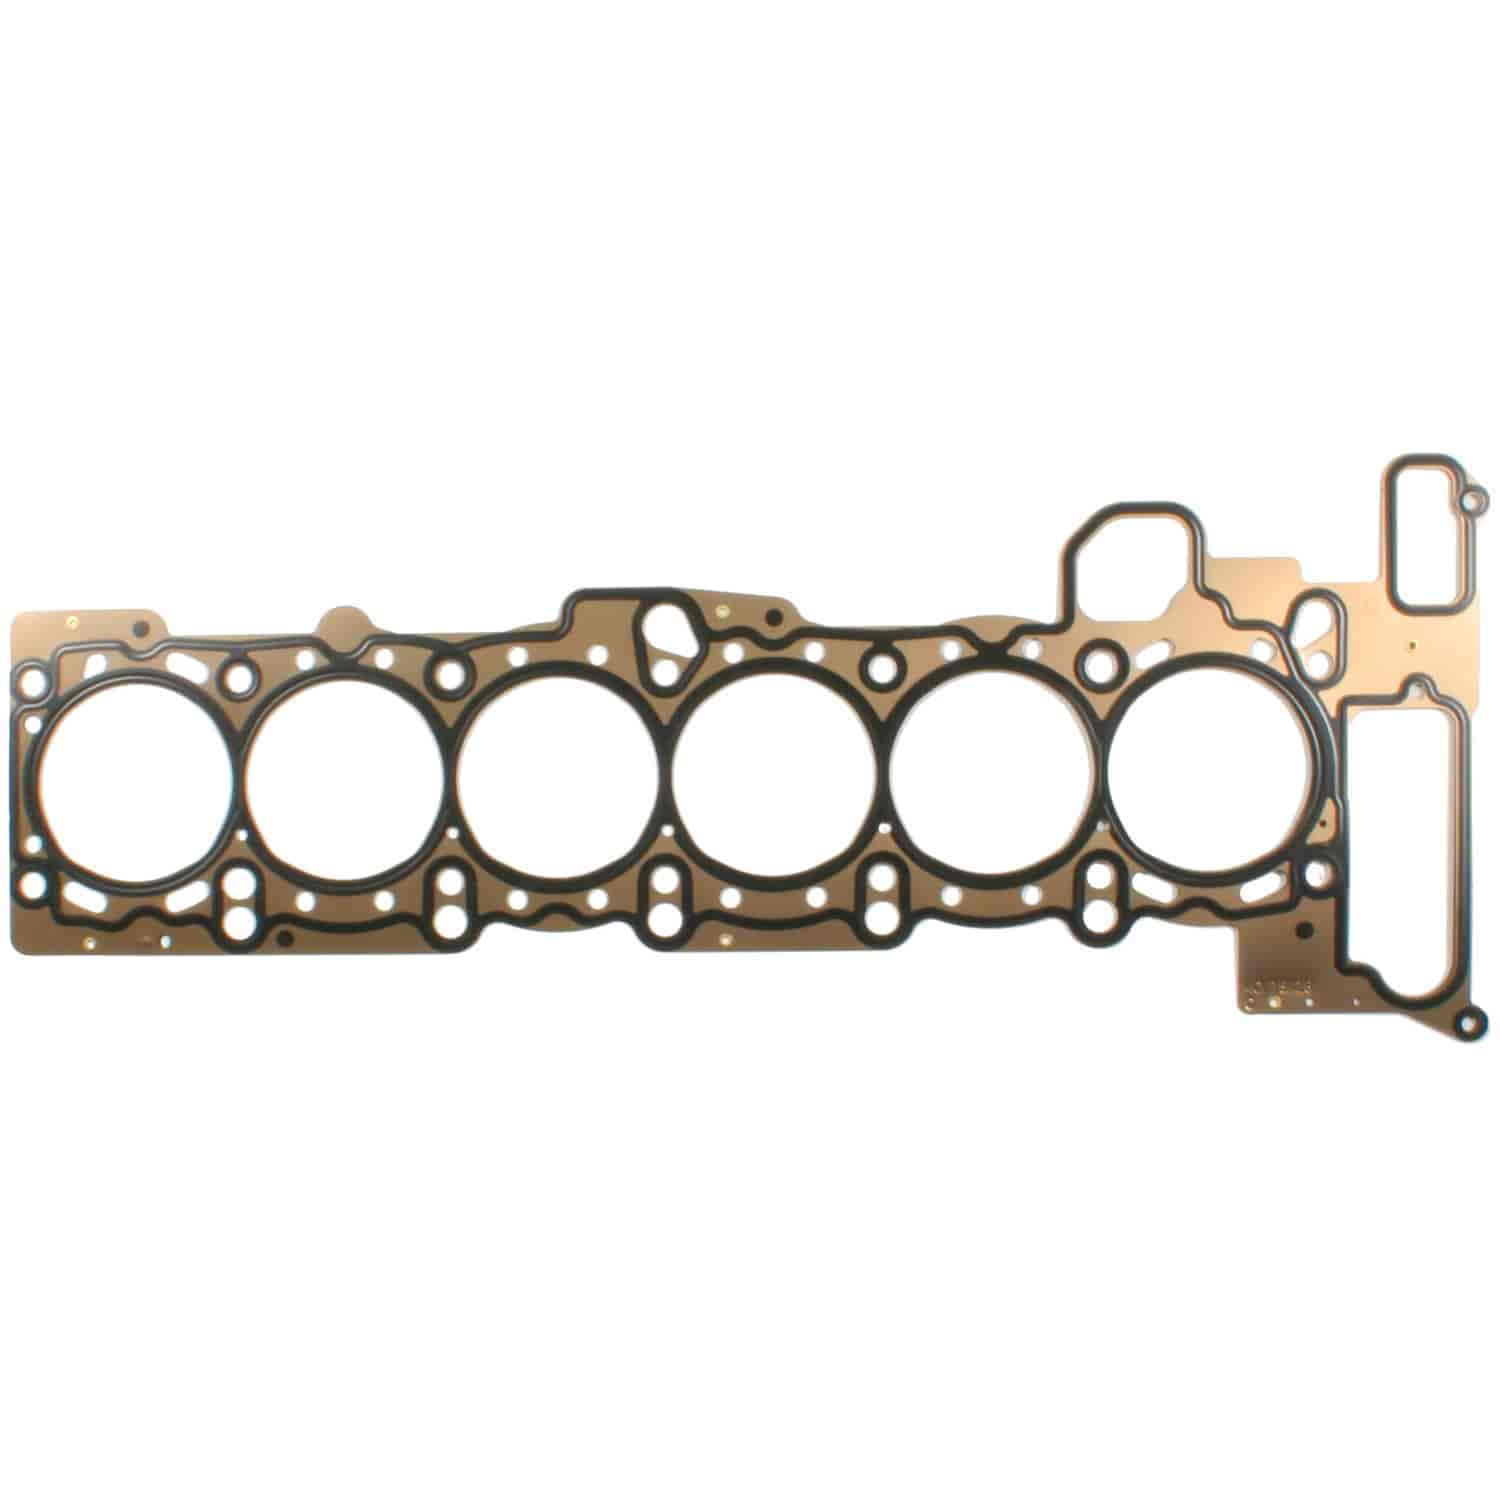 Cylinder Head Gasket BMW 3 AND 5 SERIES 1998-2002